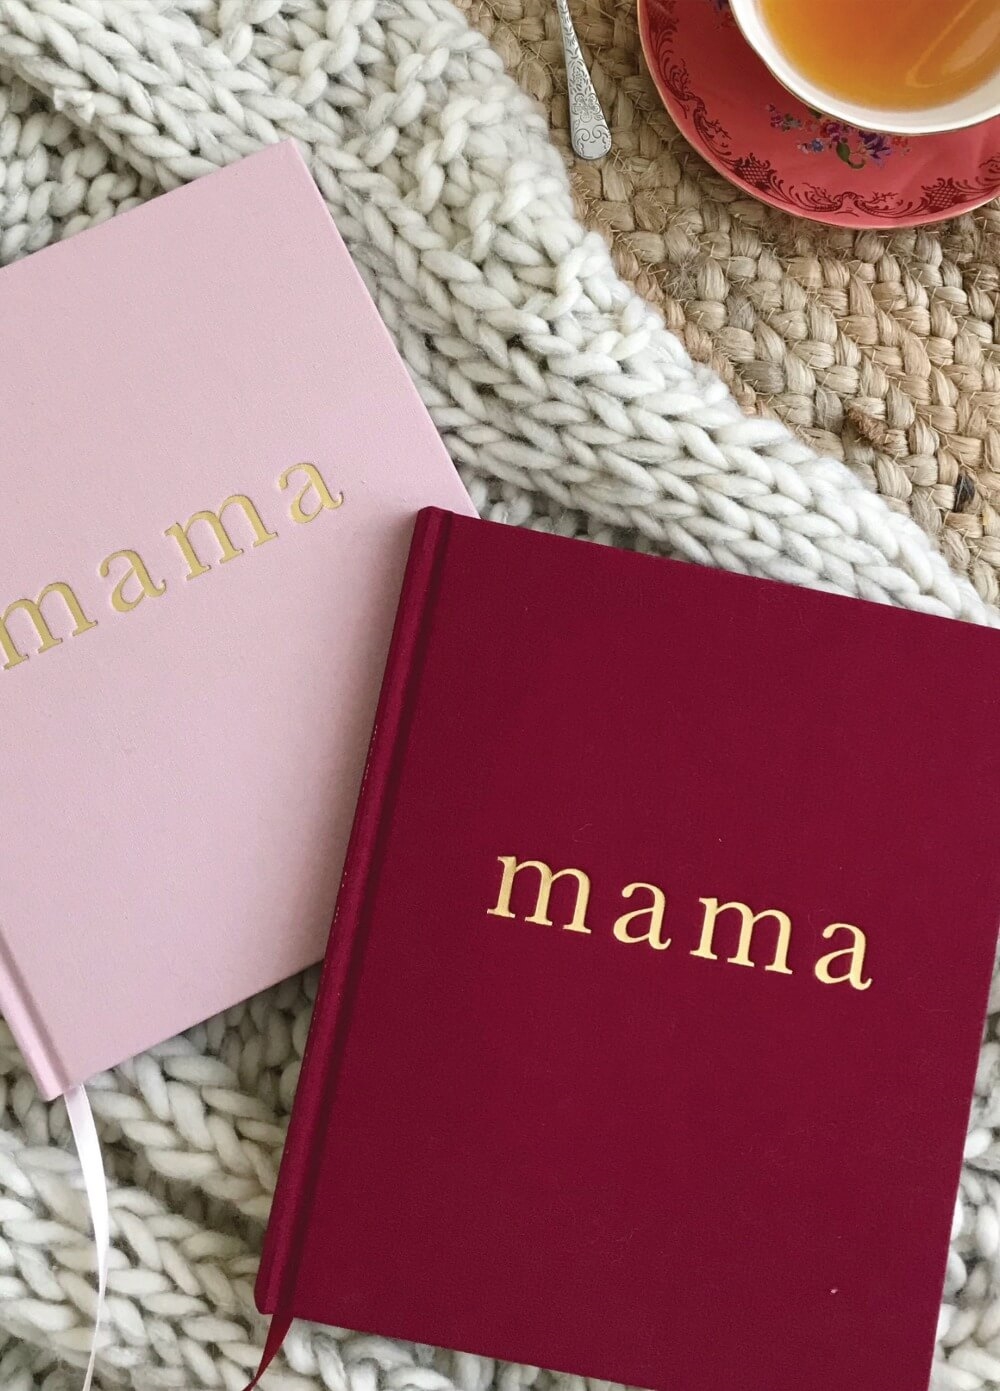 Mama Journal (Tell me about it) in Maroon by Write to Me